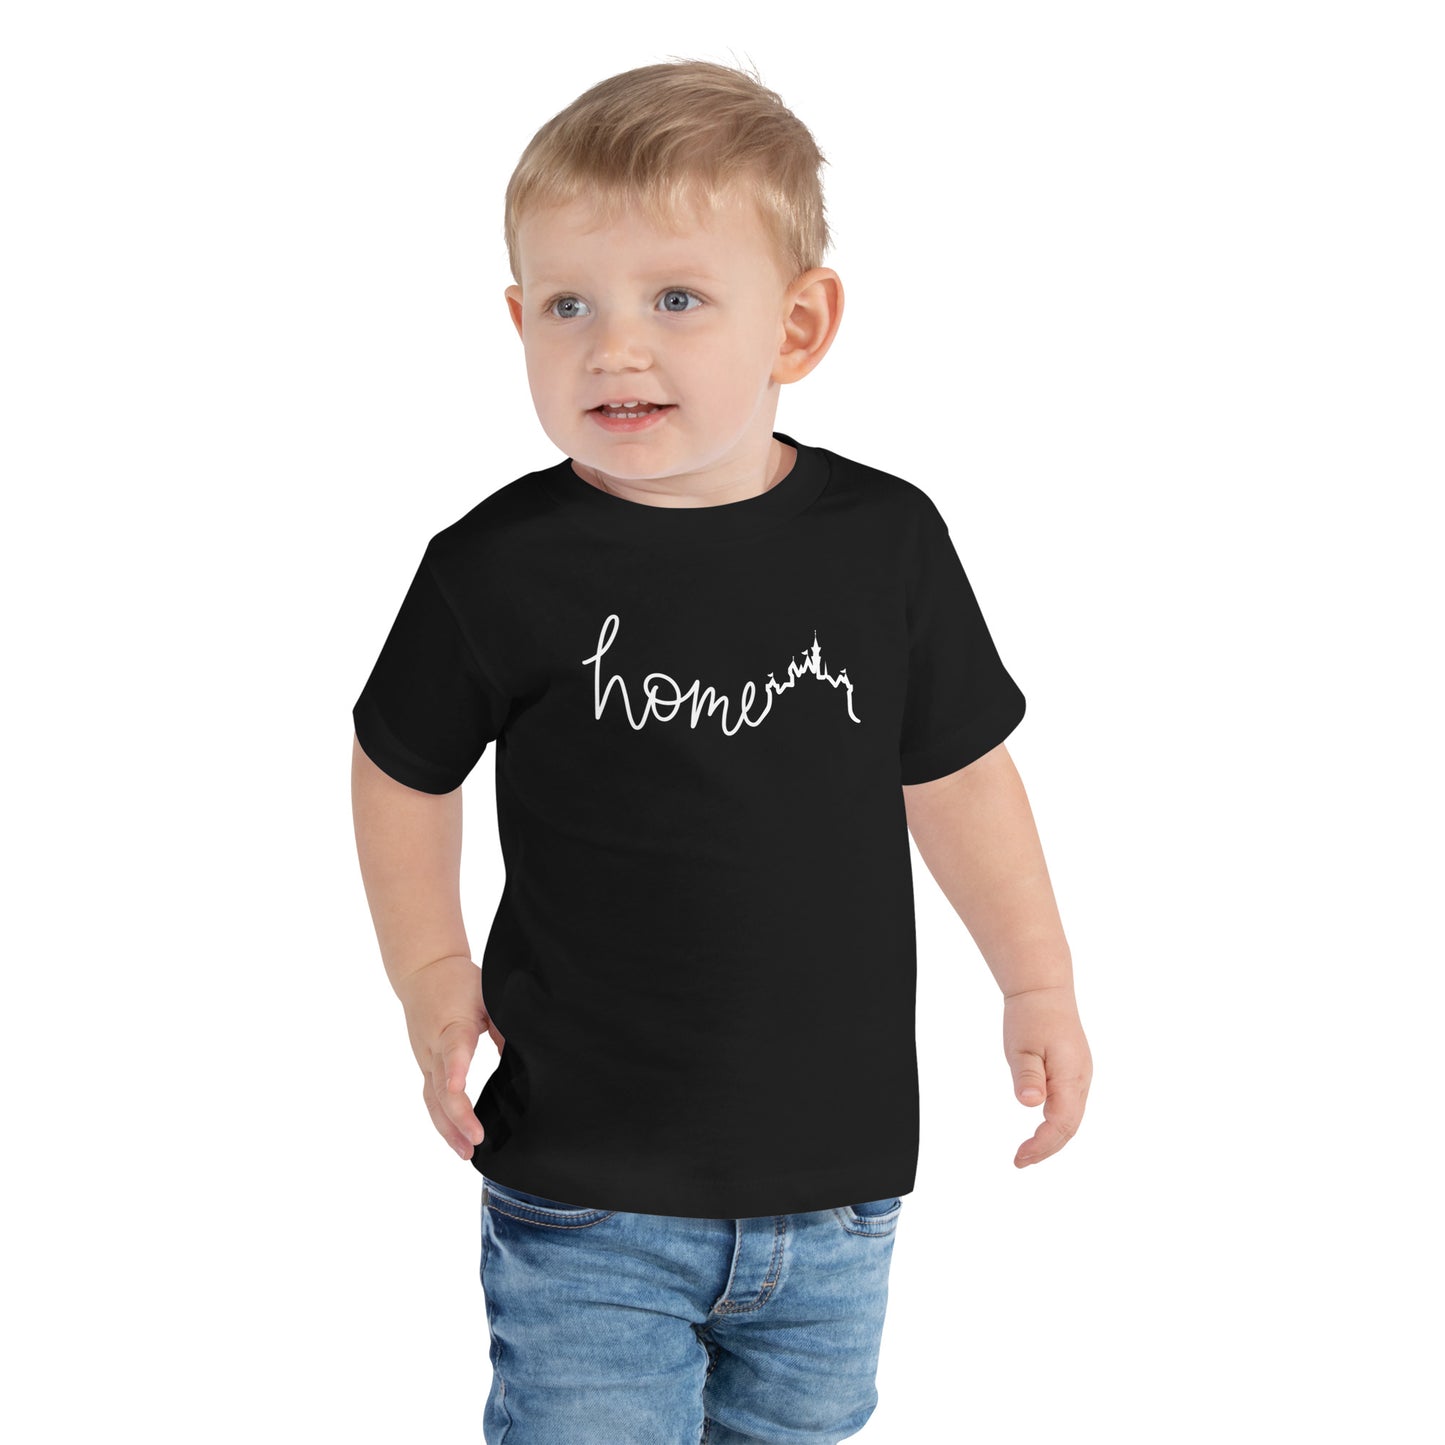 Castle Home West Toddler Tee